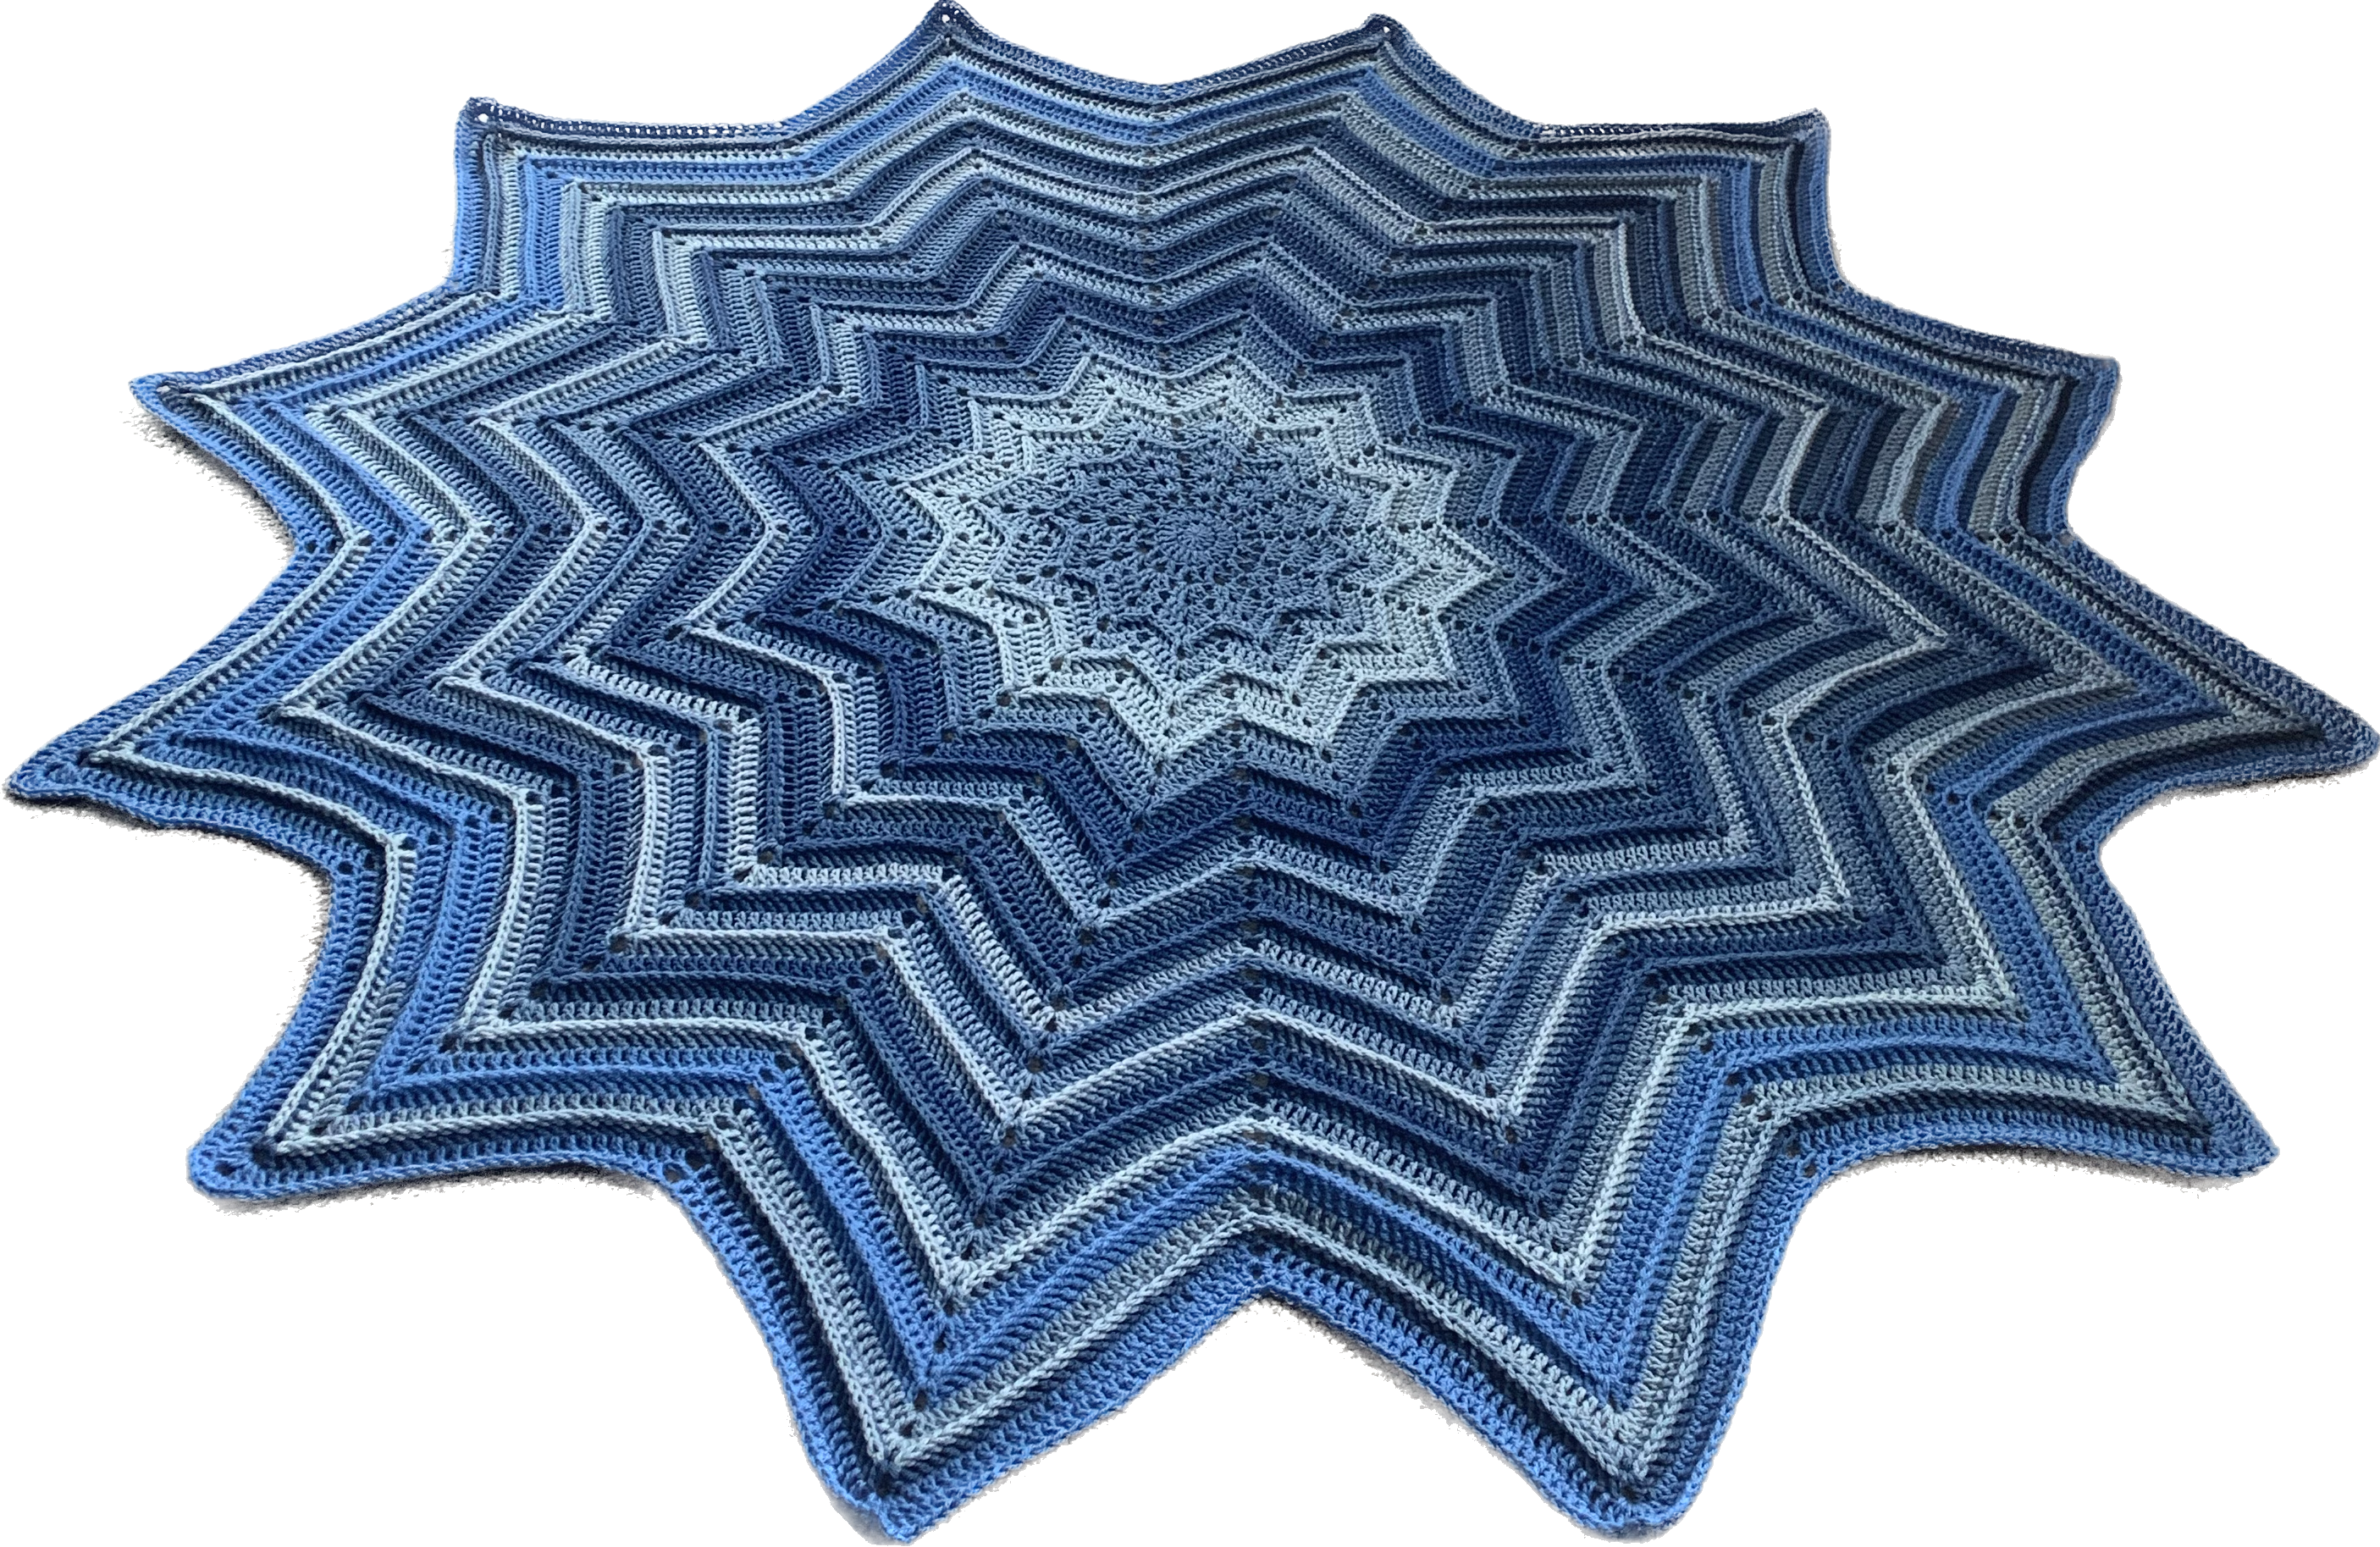 12 point star crochet blanket in various shades of blue